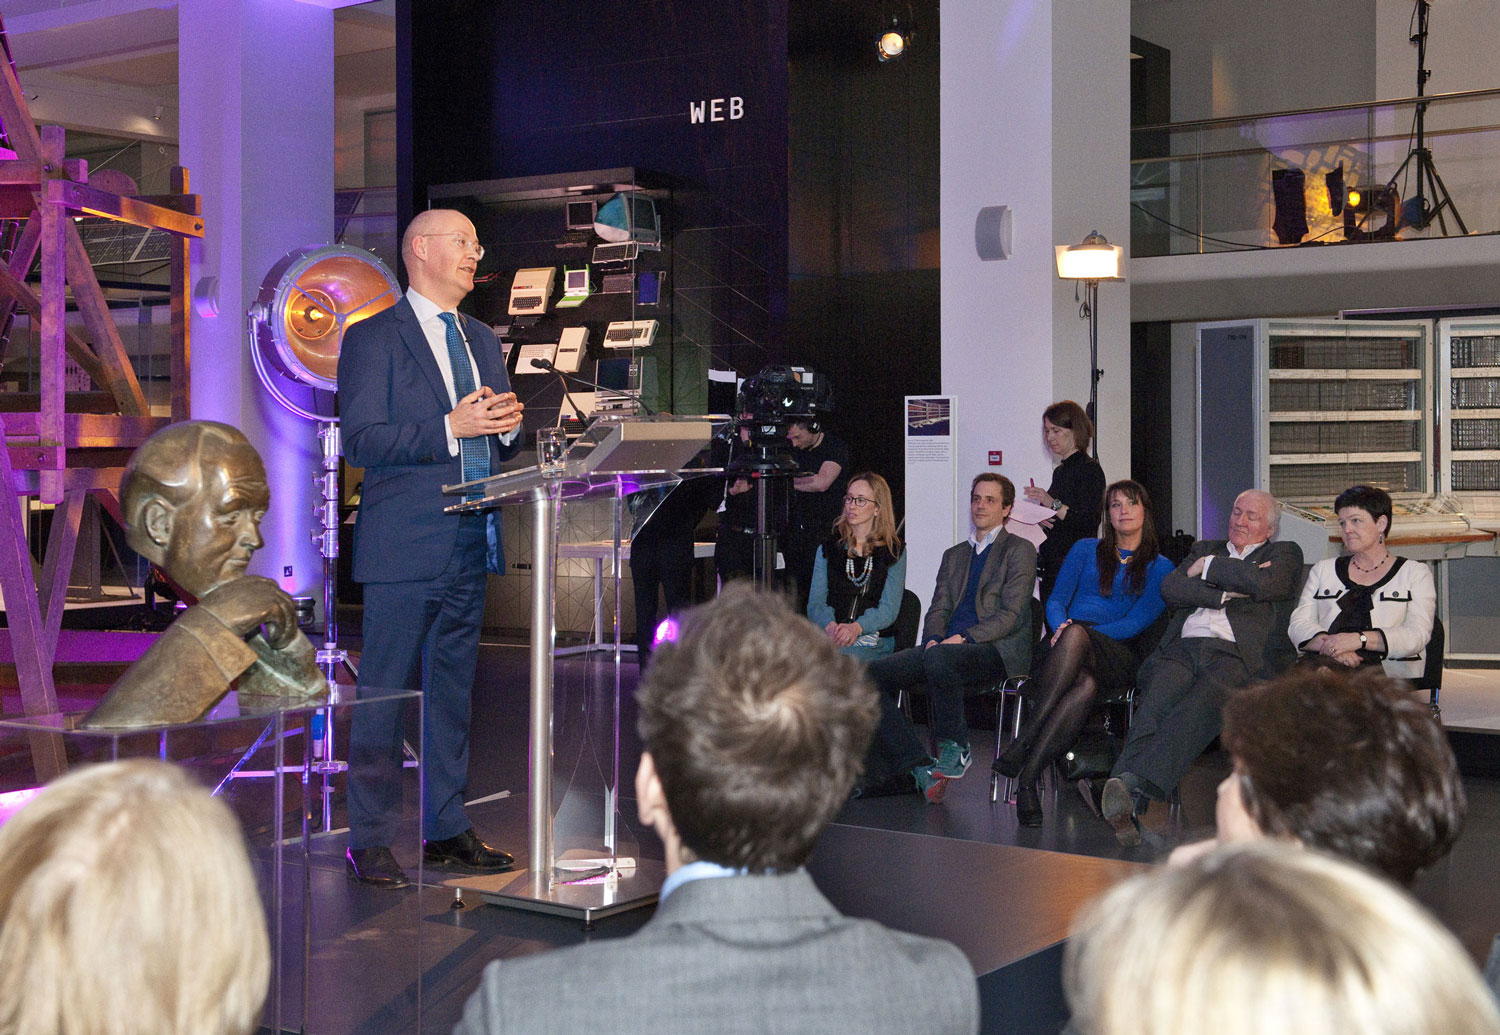 Ian Blatchford giving a speech in the Information Age gallery